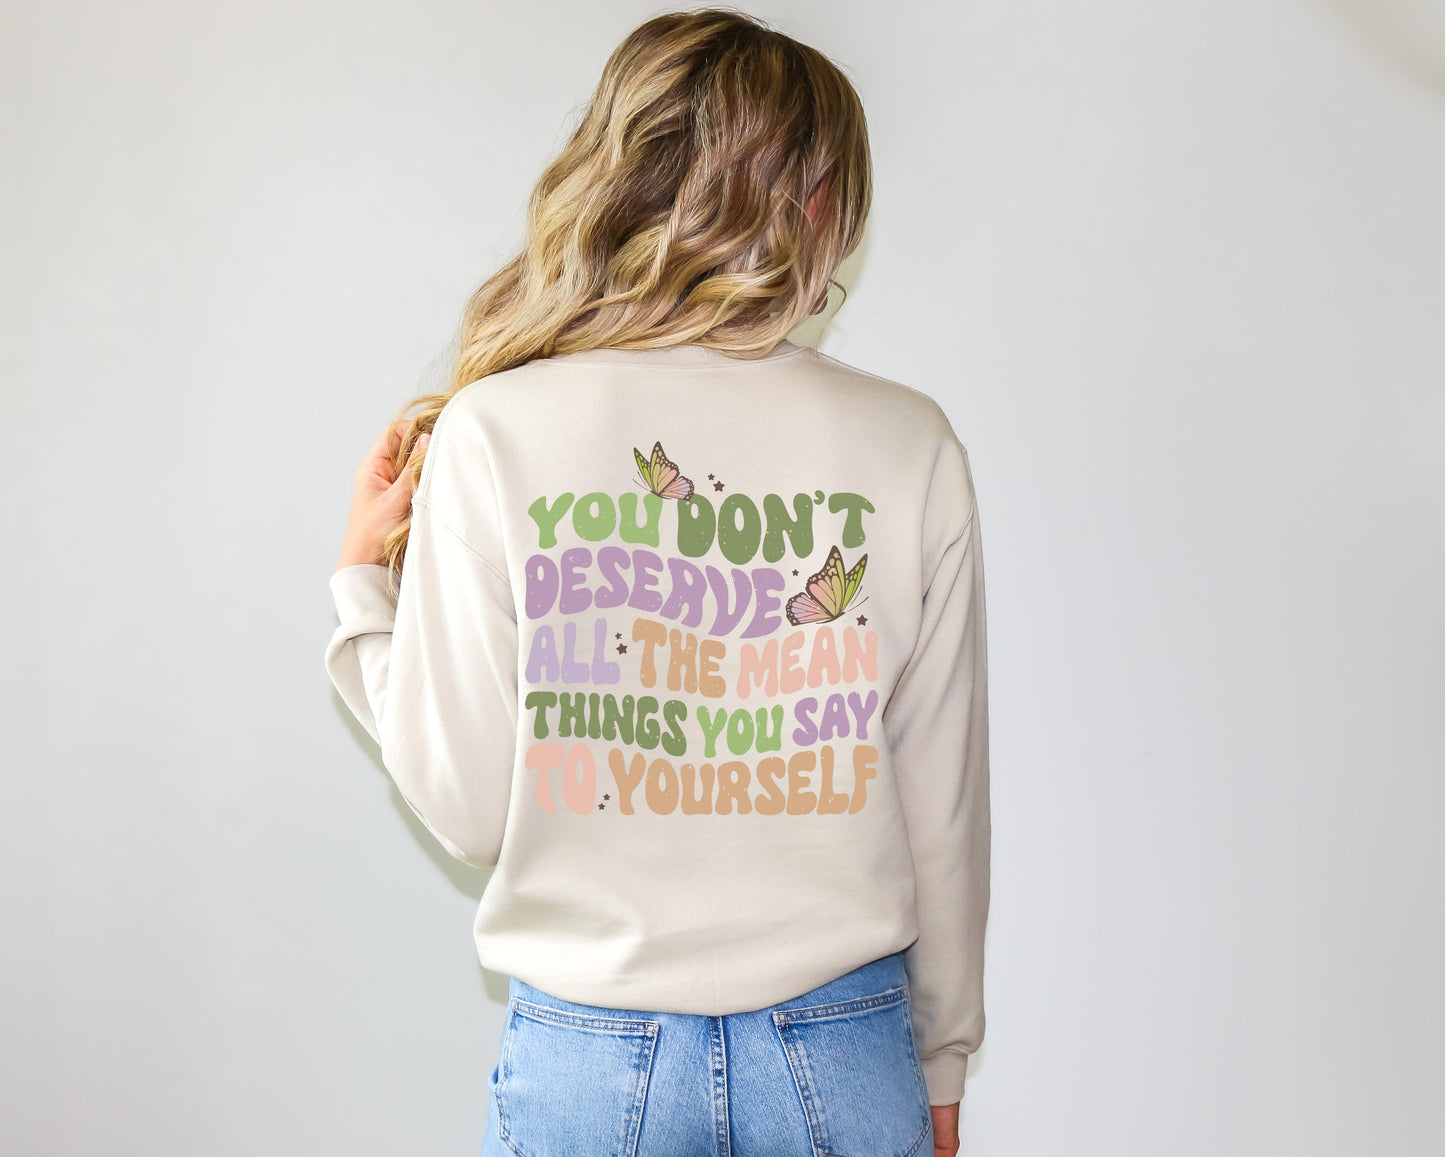 You Don't Deserve All The Mean Things You Say To Yourself Sweatshirt | Motivational Crewneck Sweatshirts